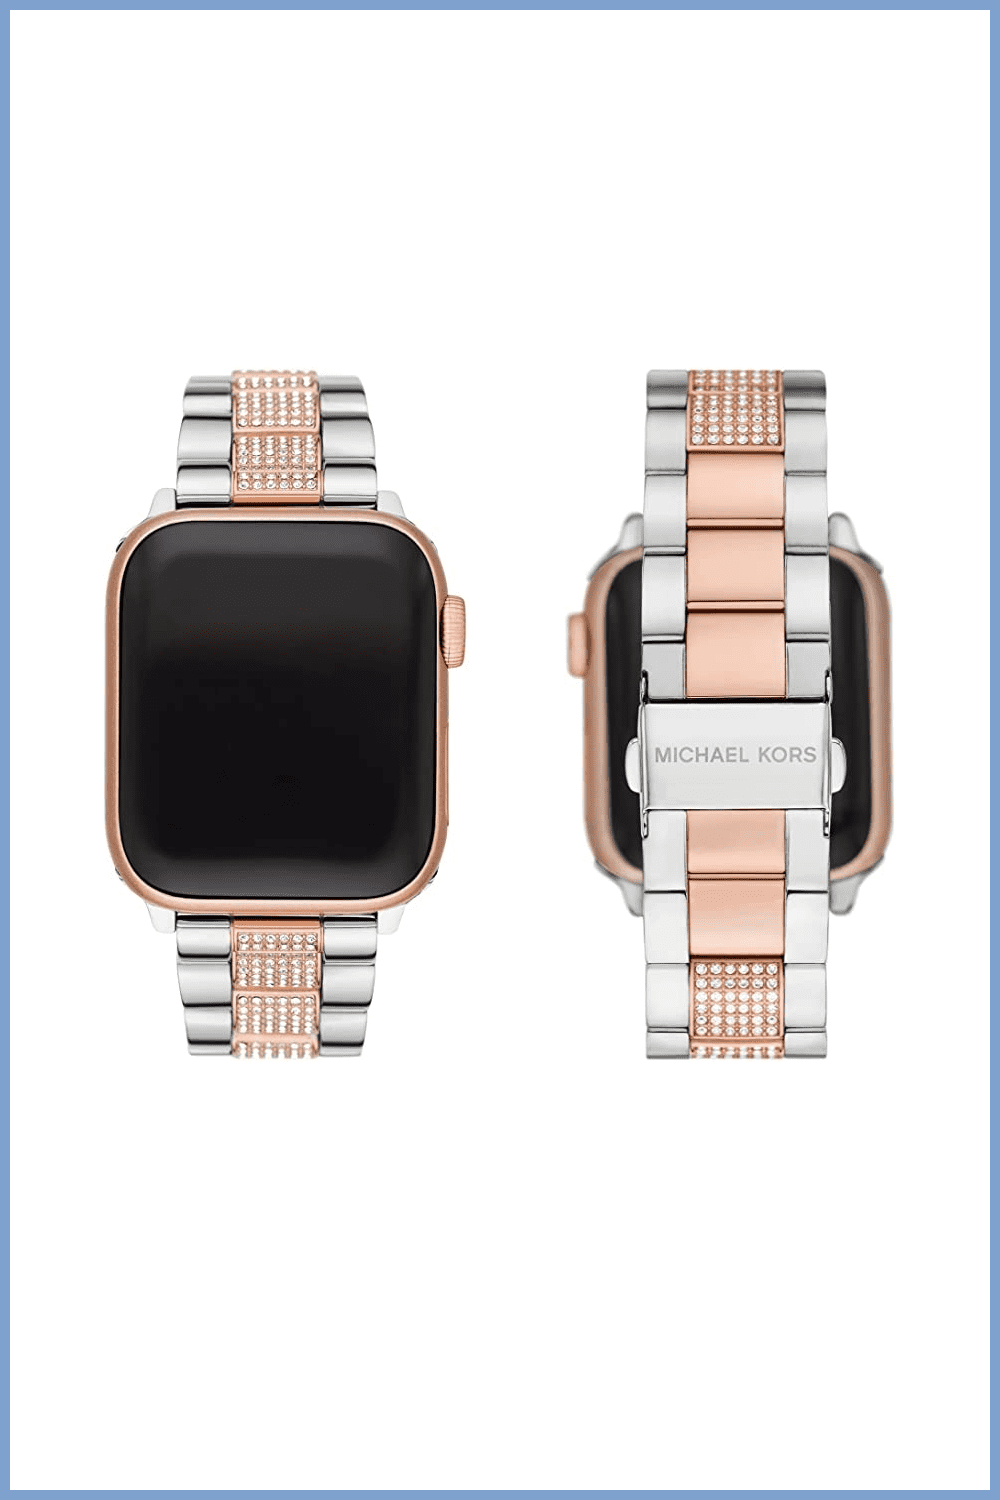 Apple watch with luxury silver and gold band.